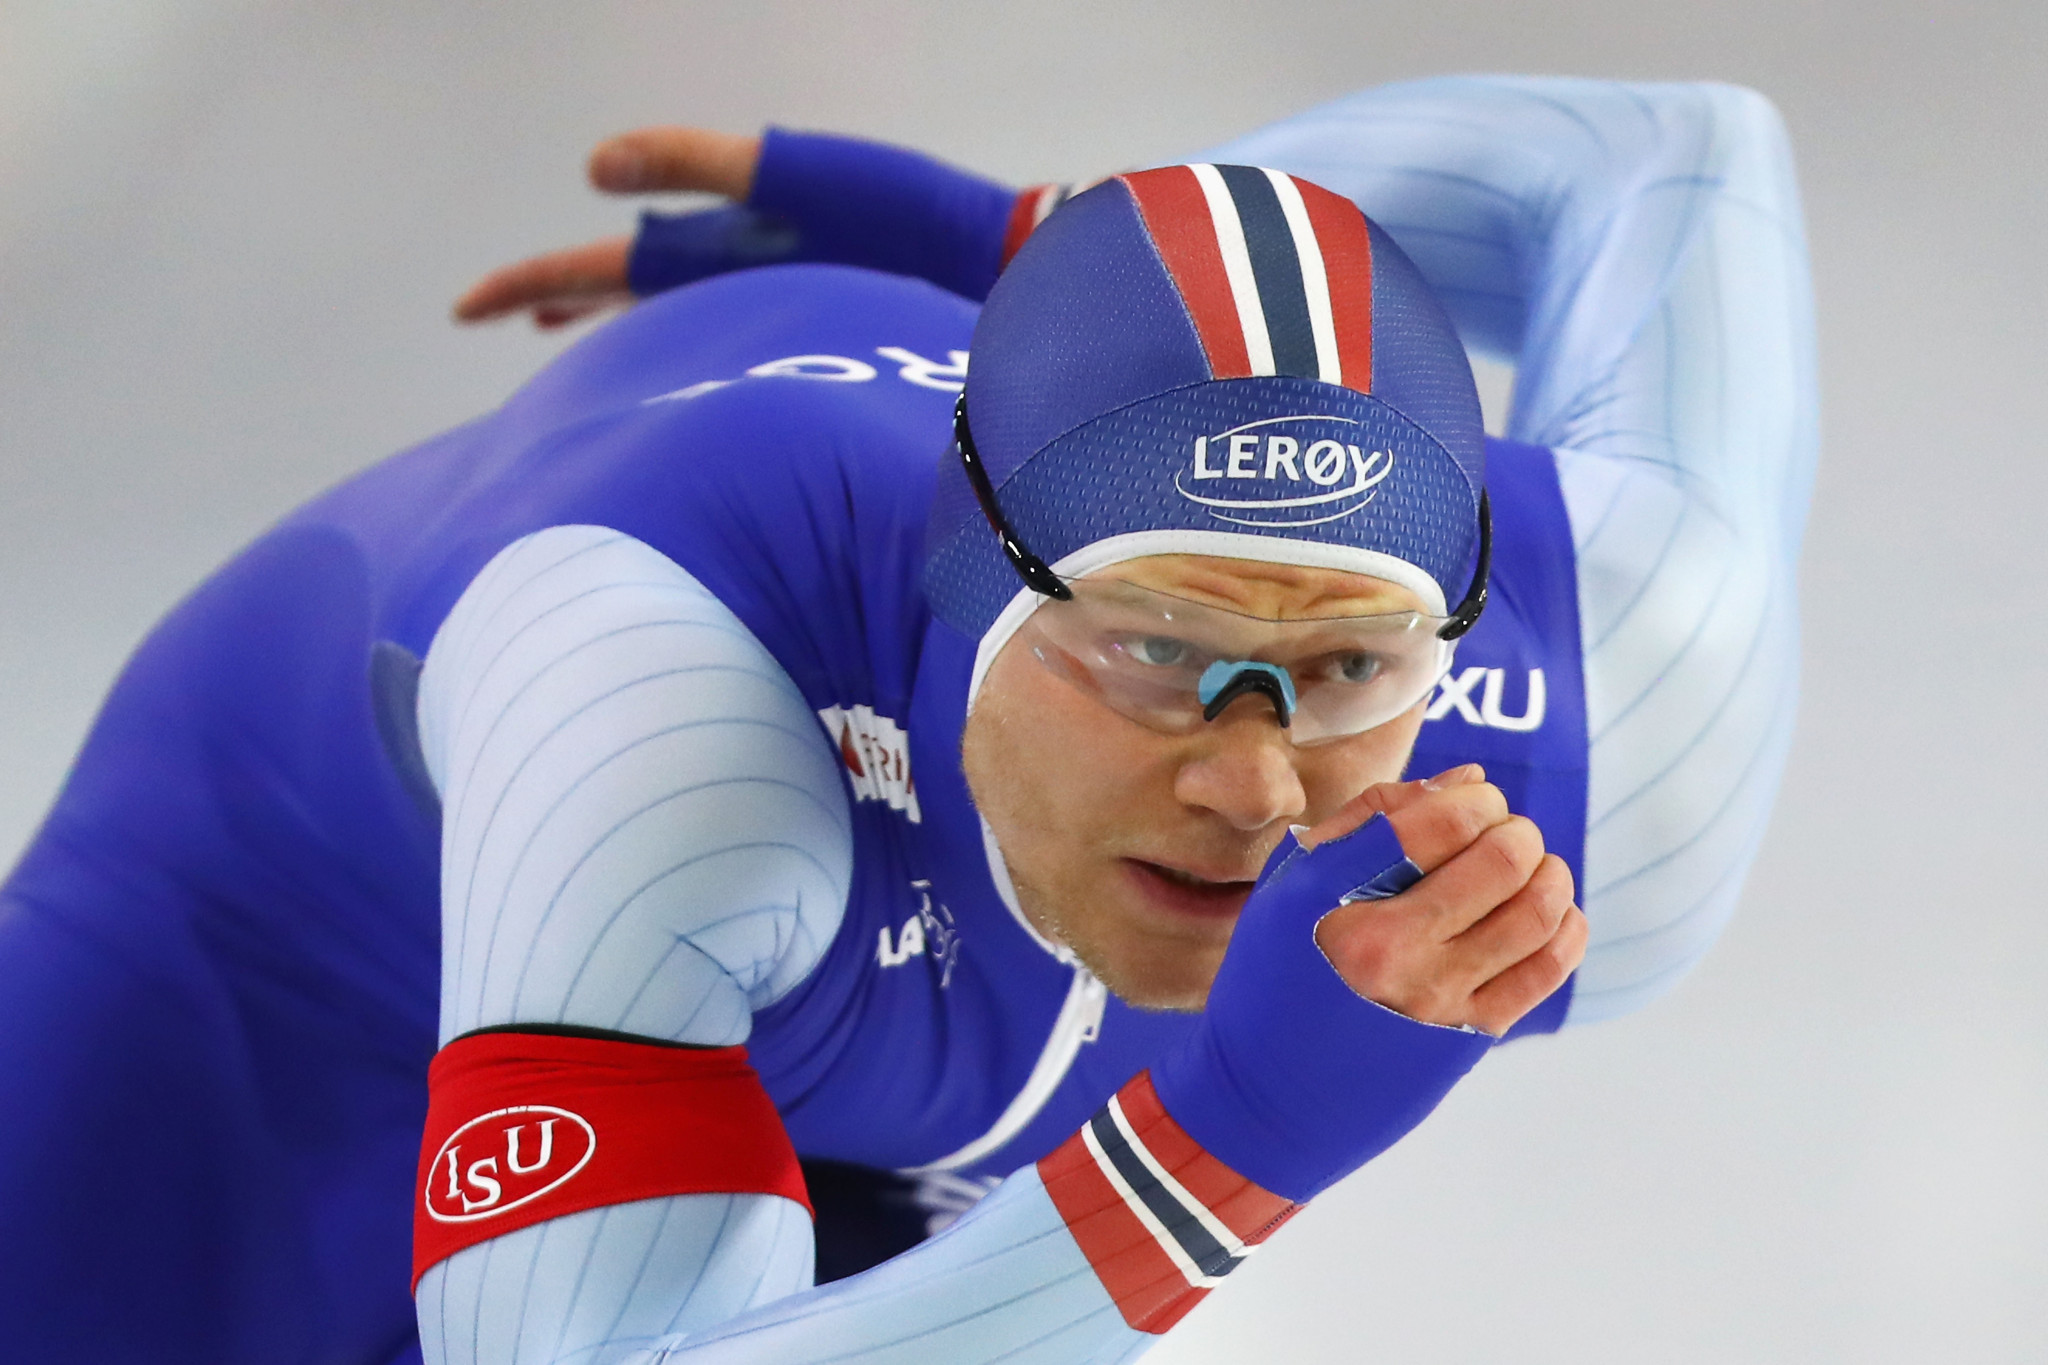 Olympic gold medallist Håvard Lorentzen is targeting a return to form ©Getty Images